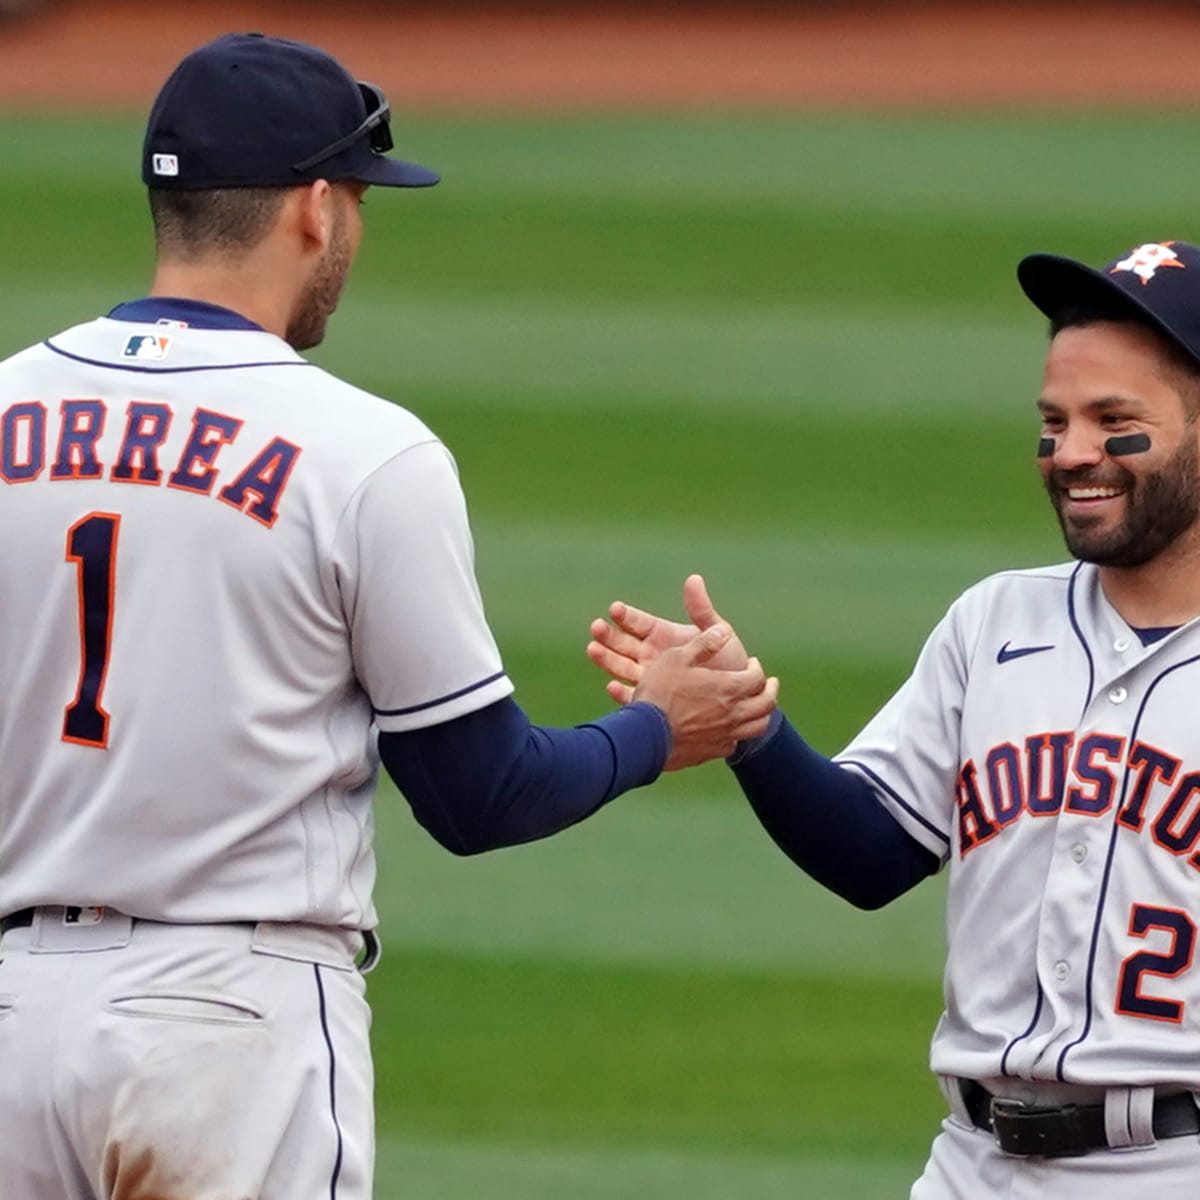 Houston Astros appear prepared for an all-time heel tour - Sports